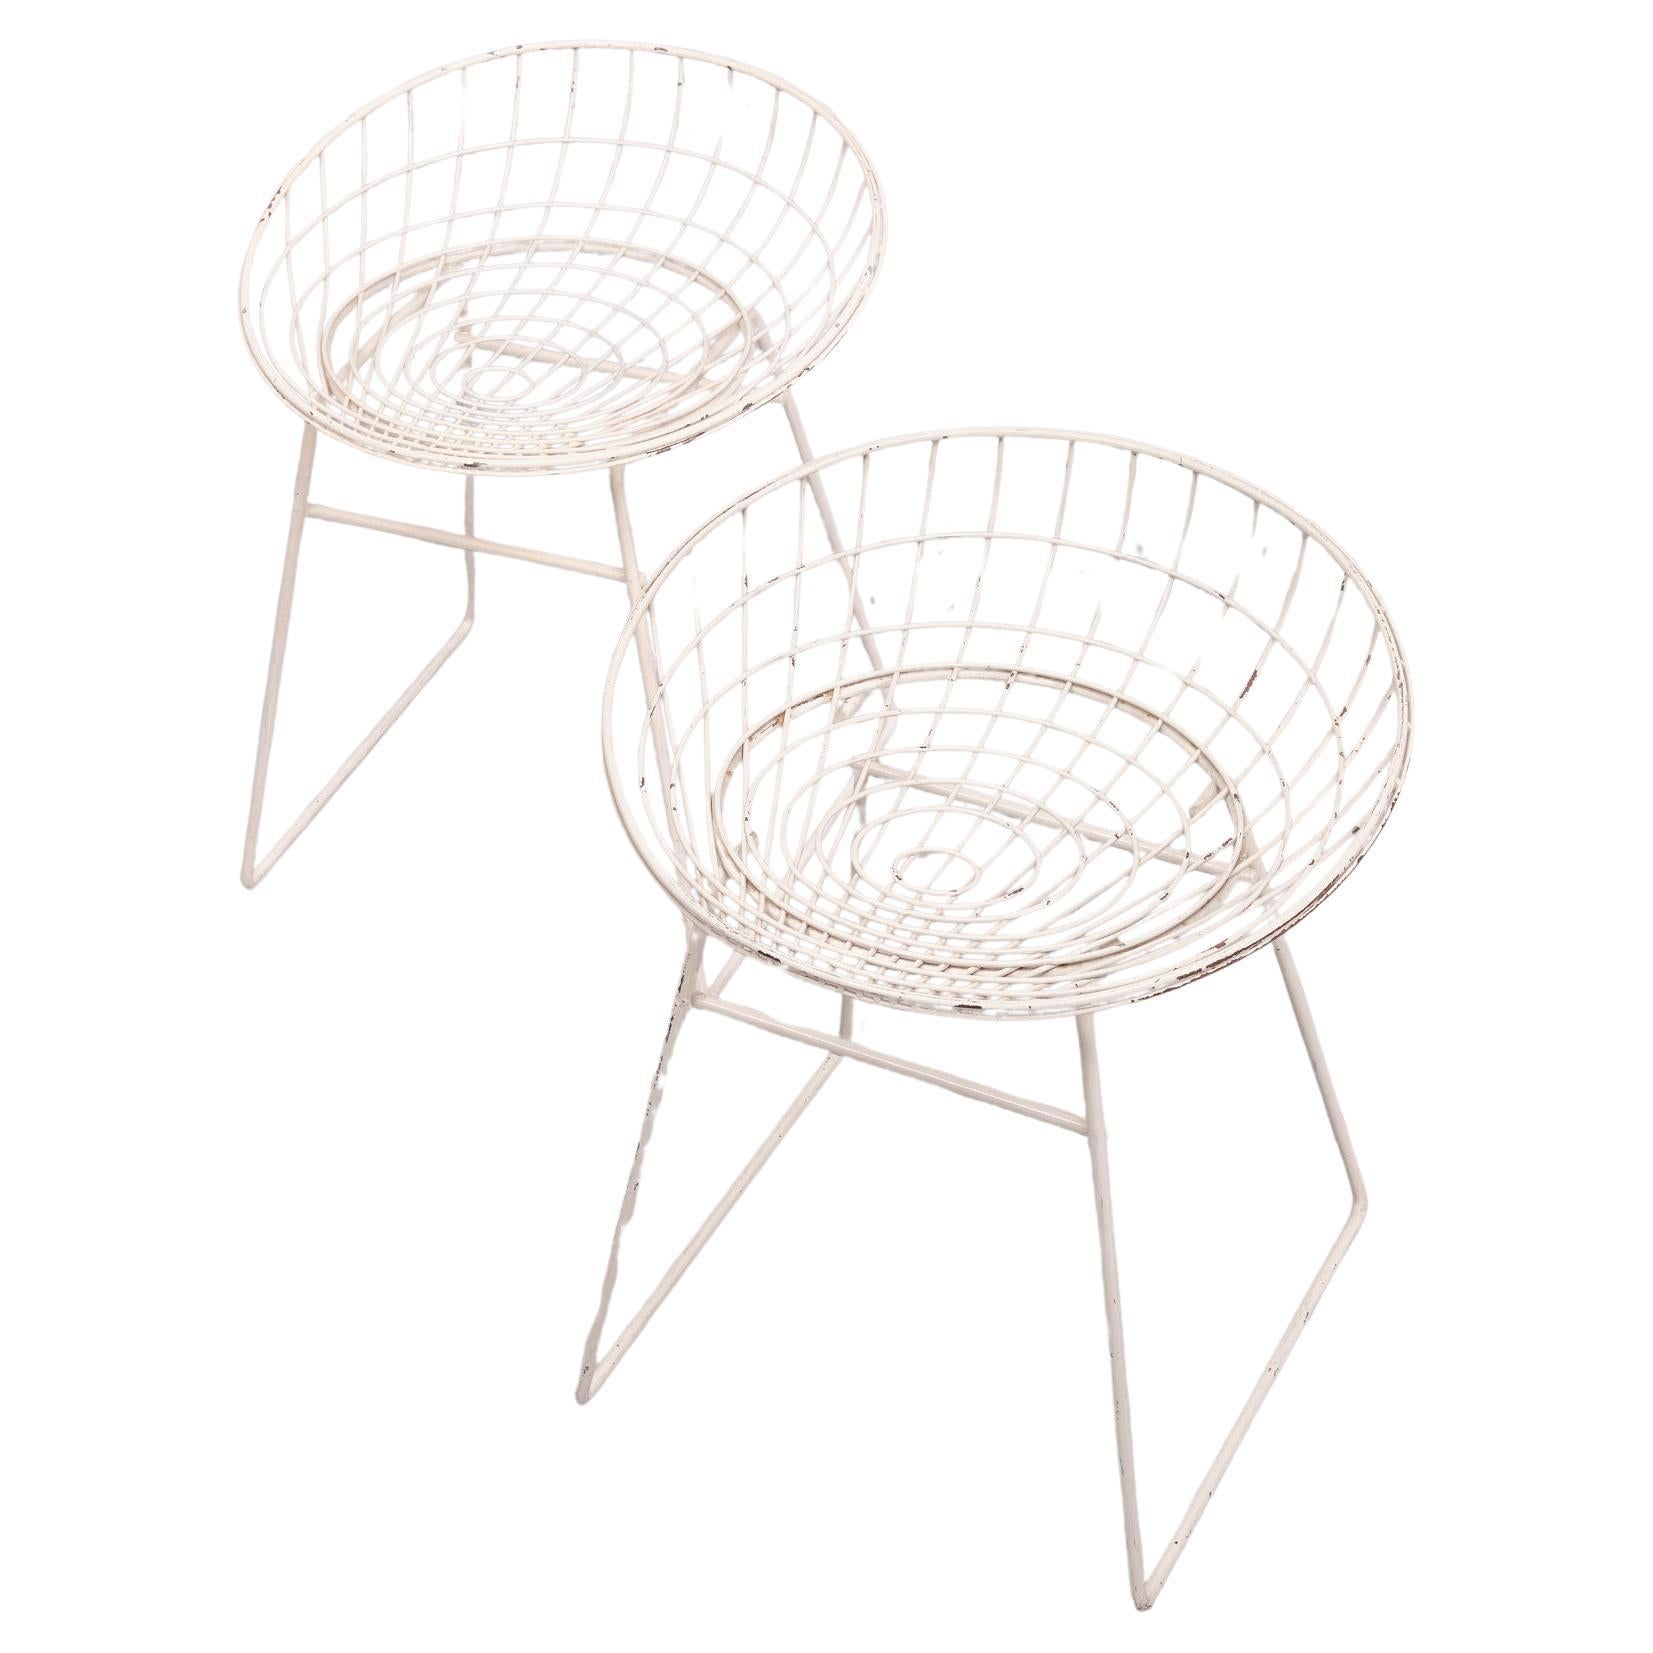 Mid-20th Century Pastoe KM05 wire stool Cees Braakman  1950s Holland  For Sale